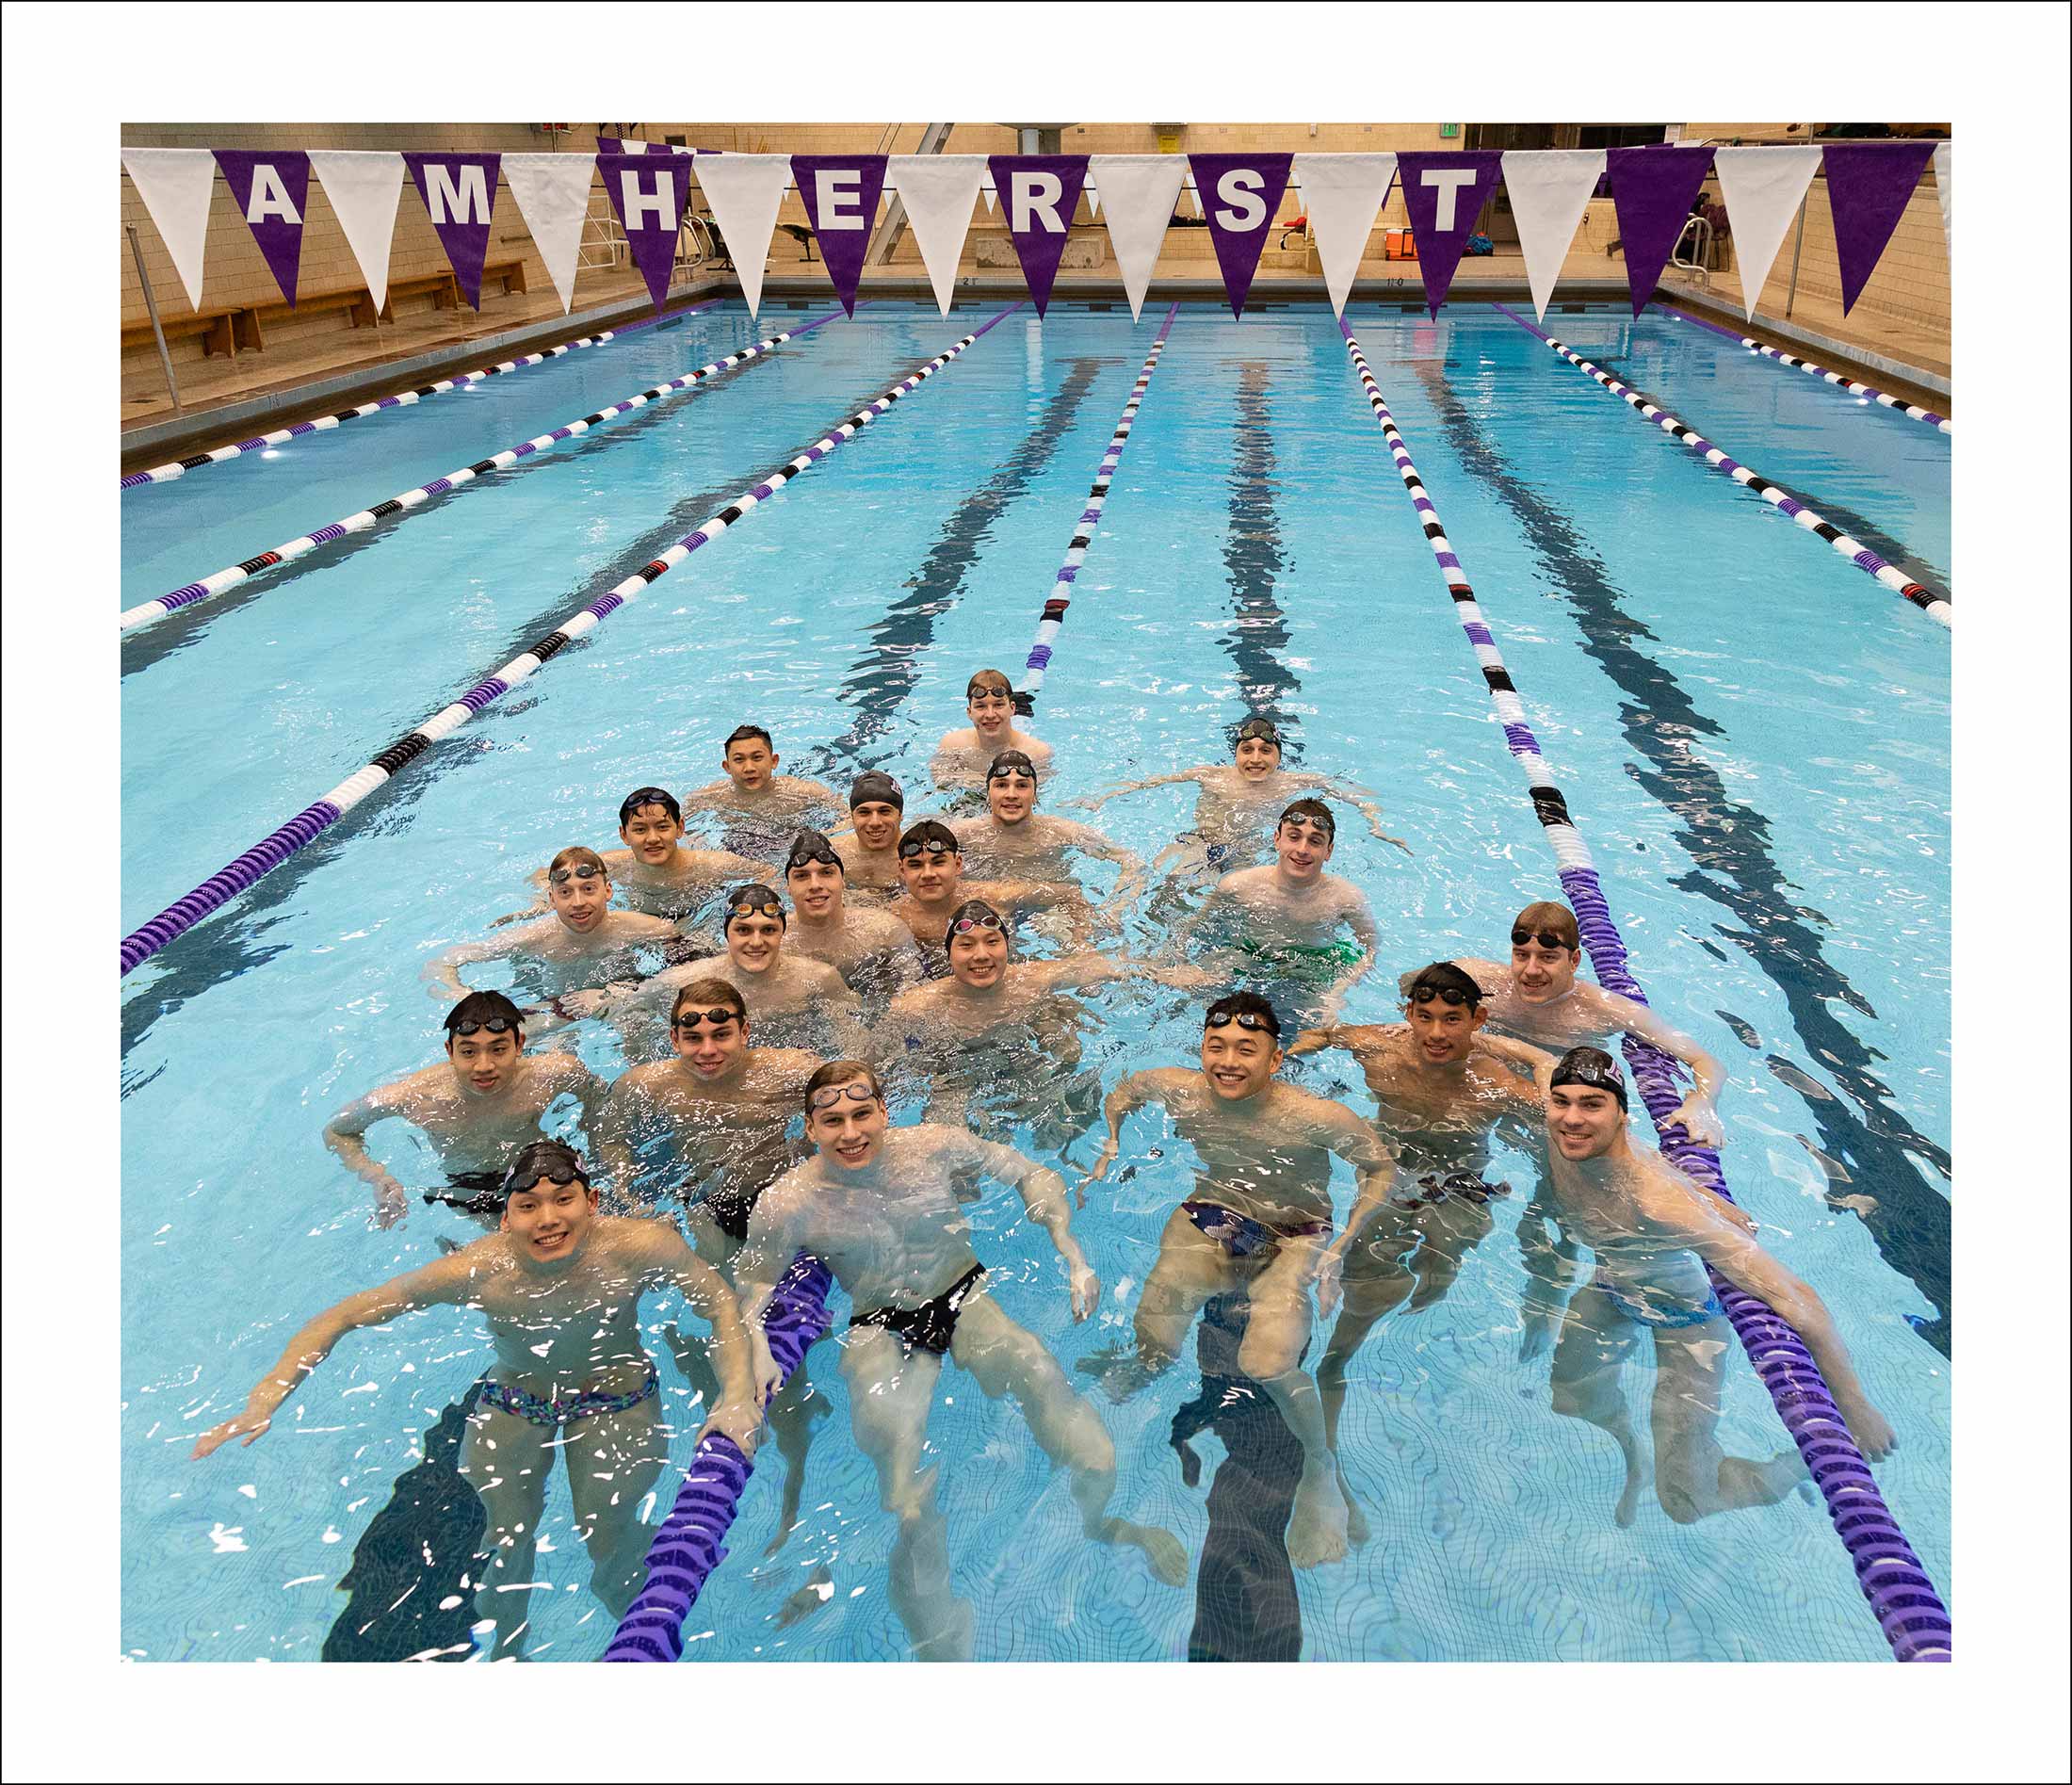 A large group of men smiling at the camera from inside of a swimming pool